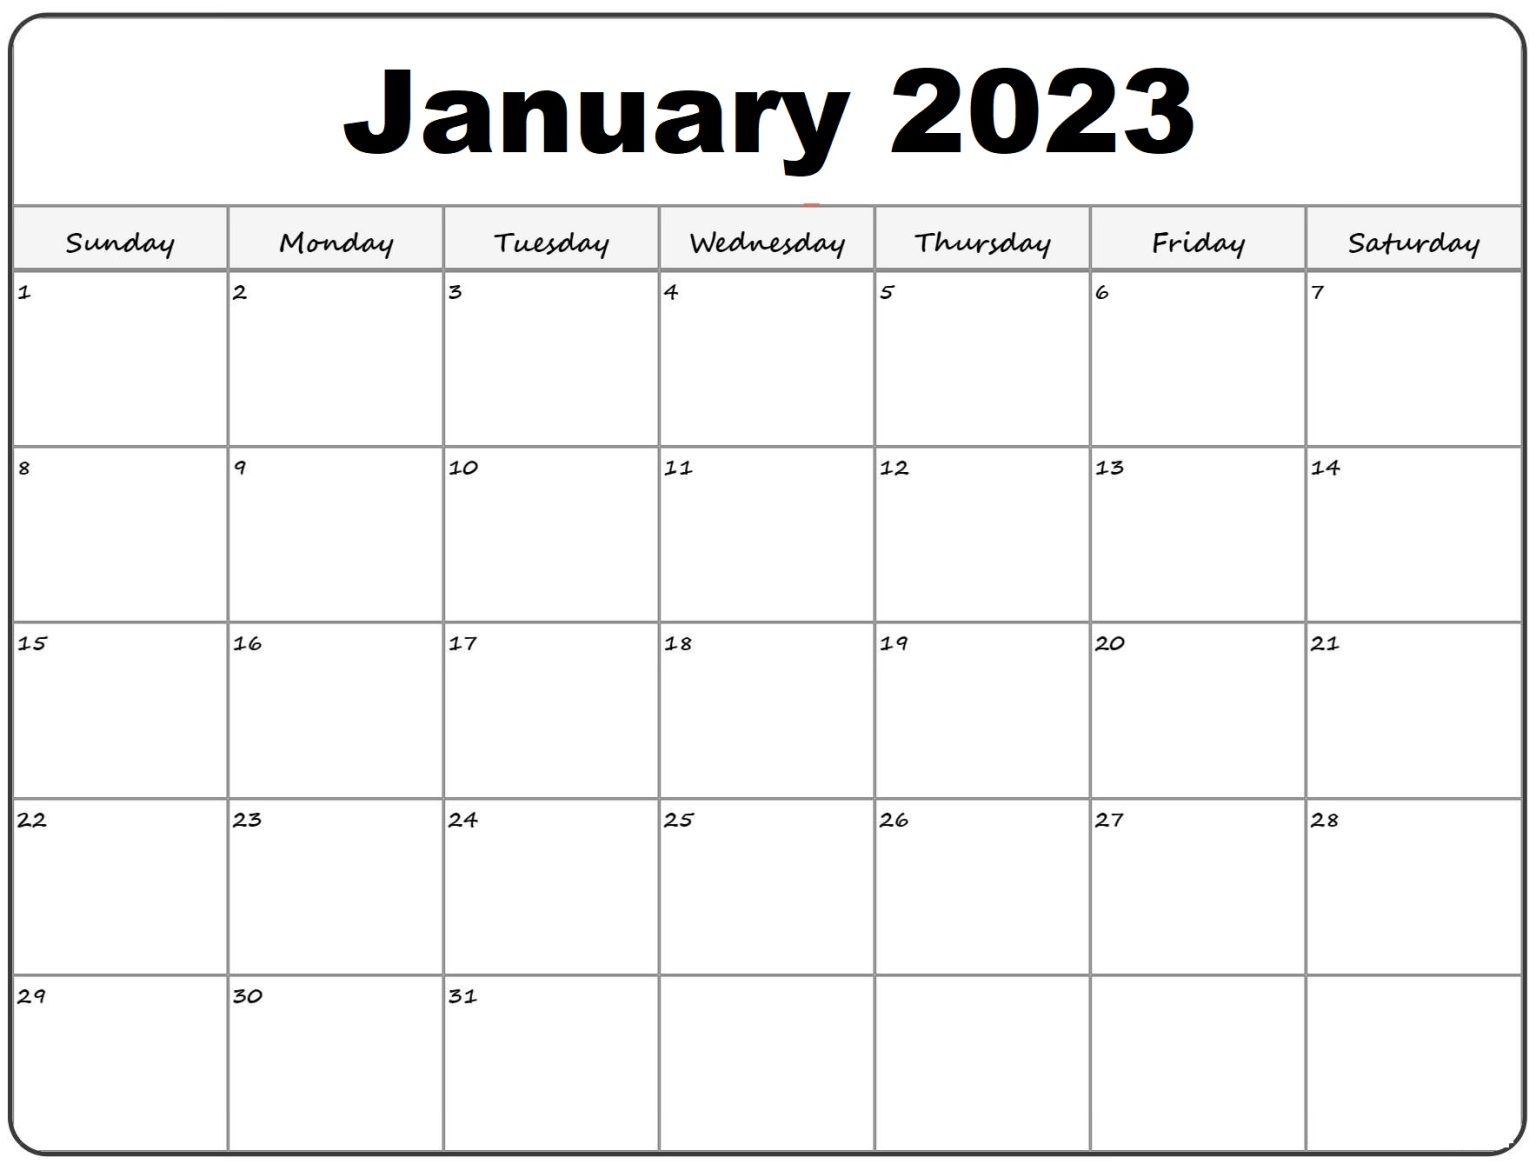 Cute January 2023 Calendar - Manage Time And Organize Your Life